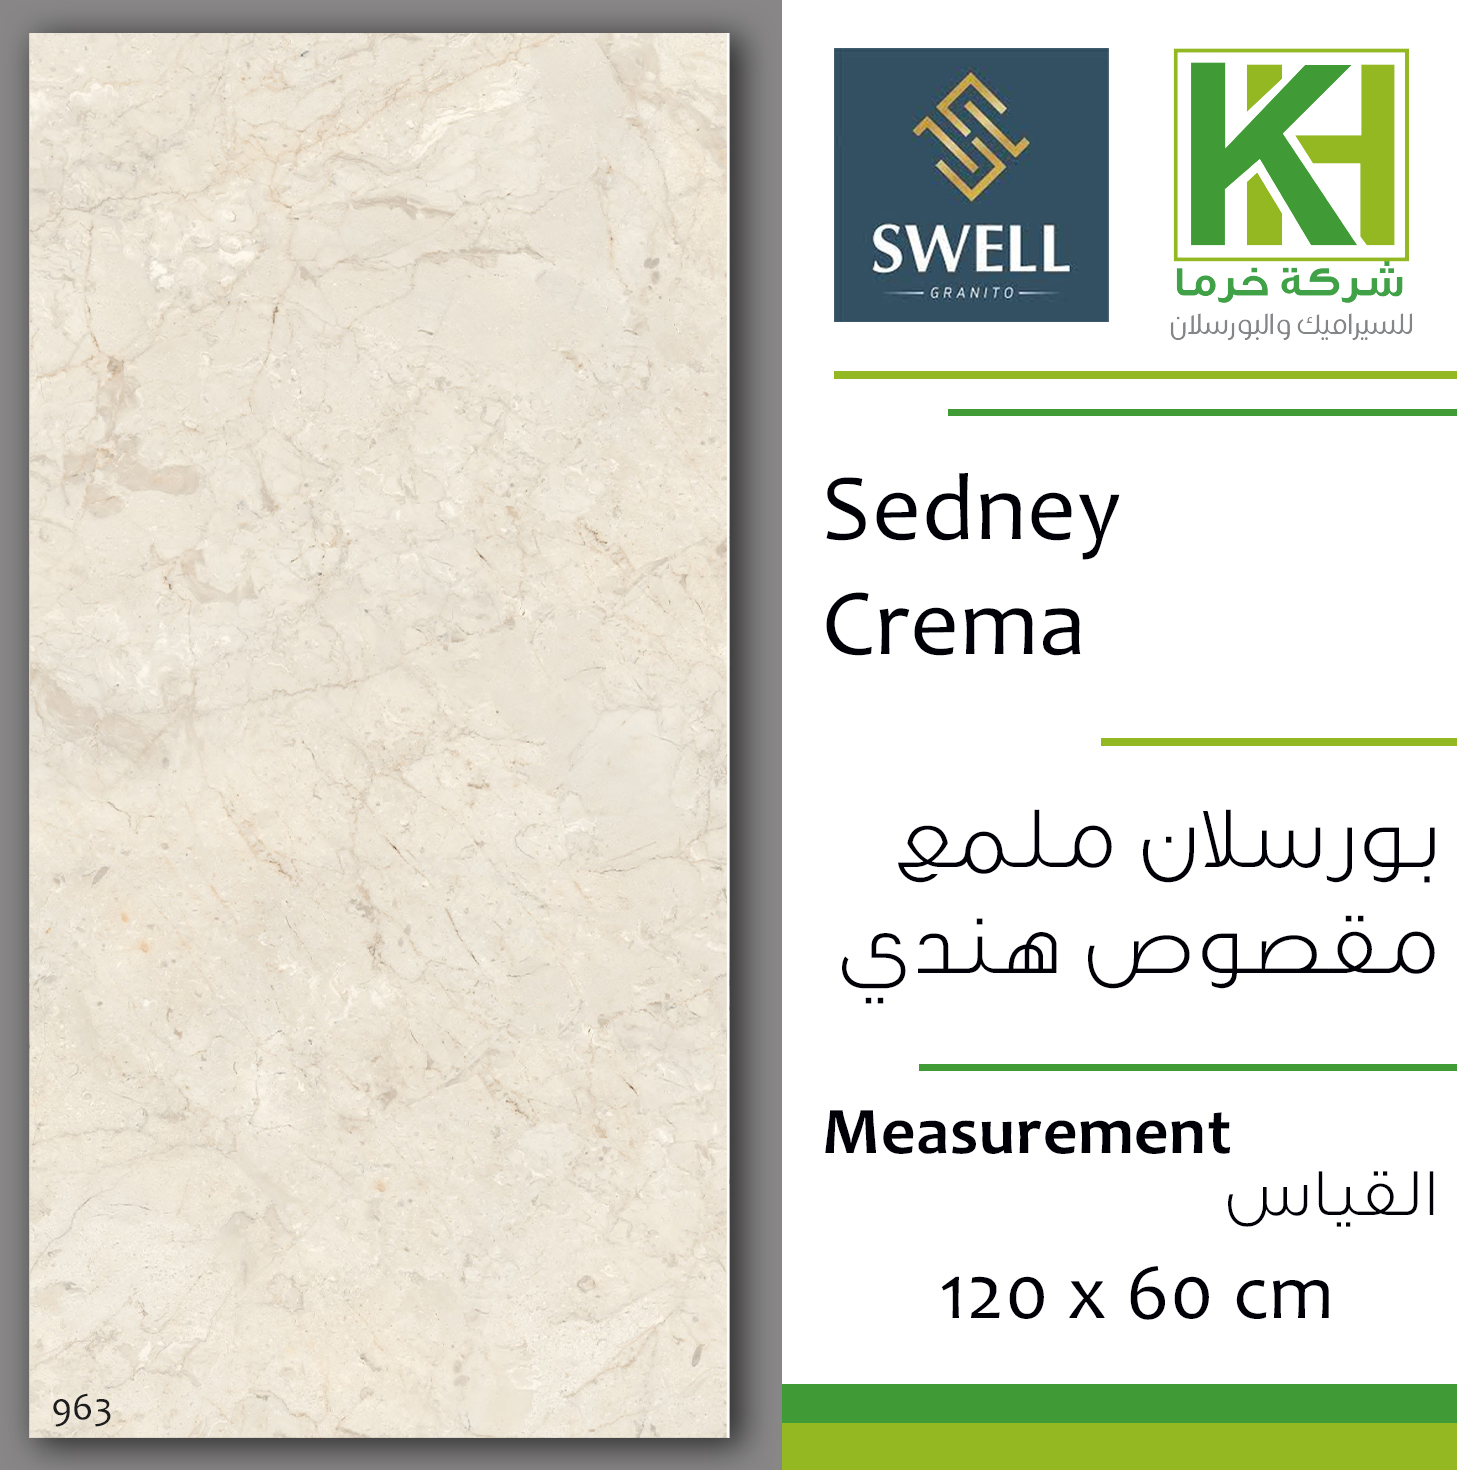 Picture of Indian glossy porcelain tile 60x120 cm Sedney Crema